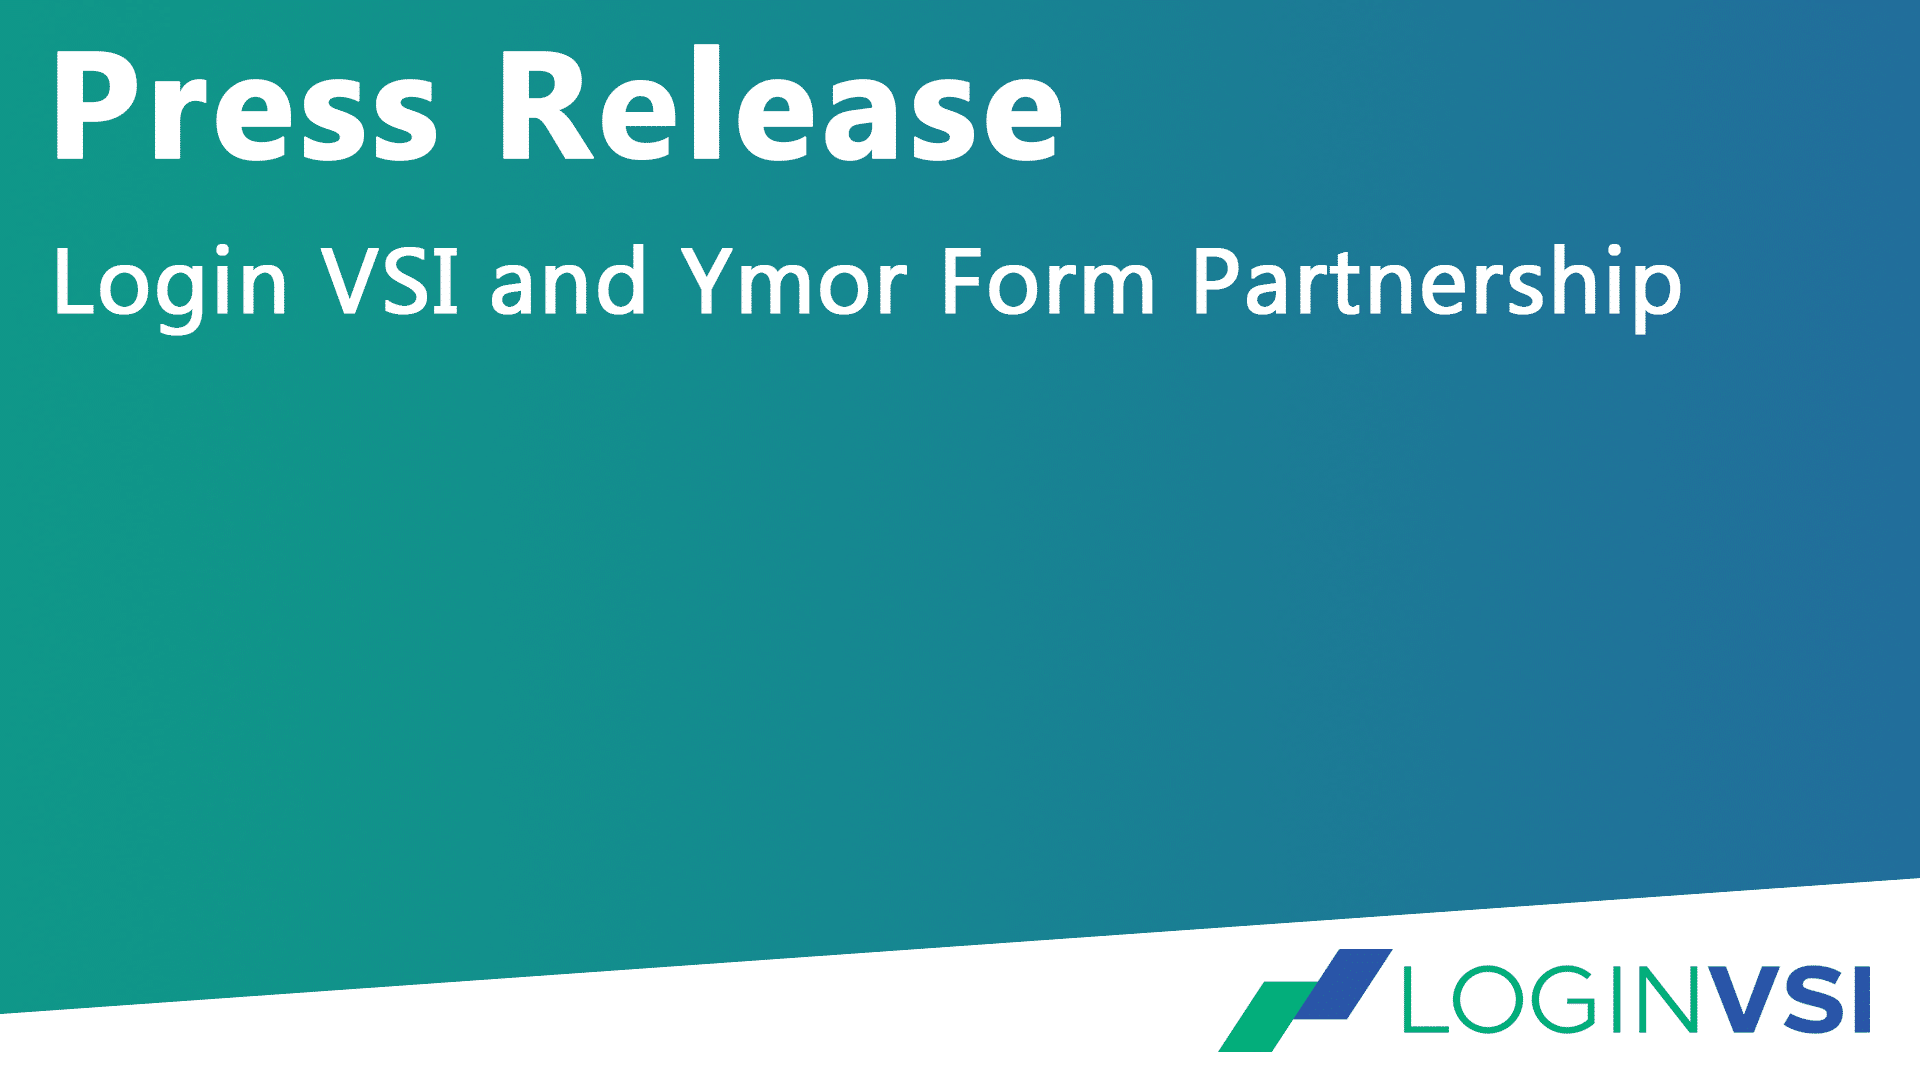 [Press Release] Login VSI and Ymor Form Partnership to Deliver Performance Improvement to Business-Critical Applications